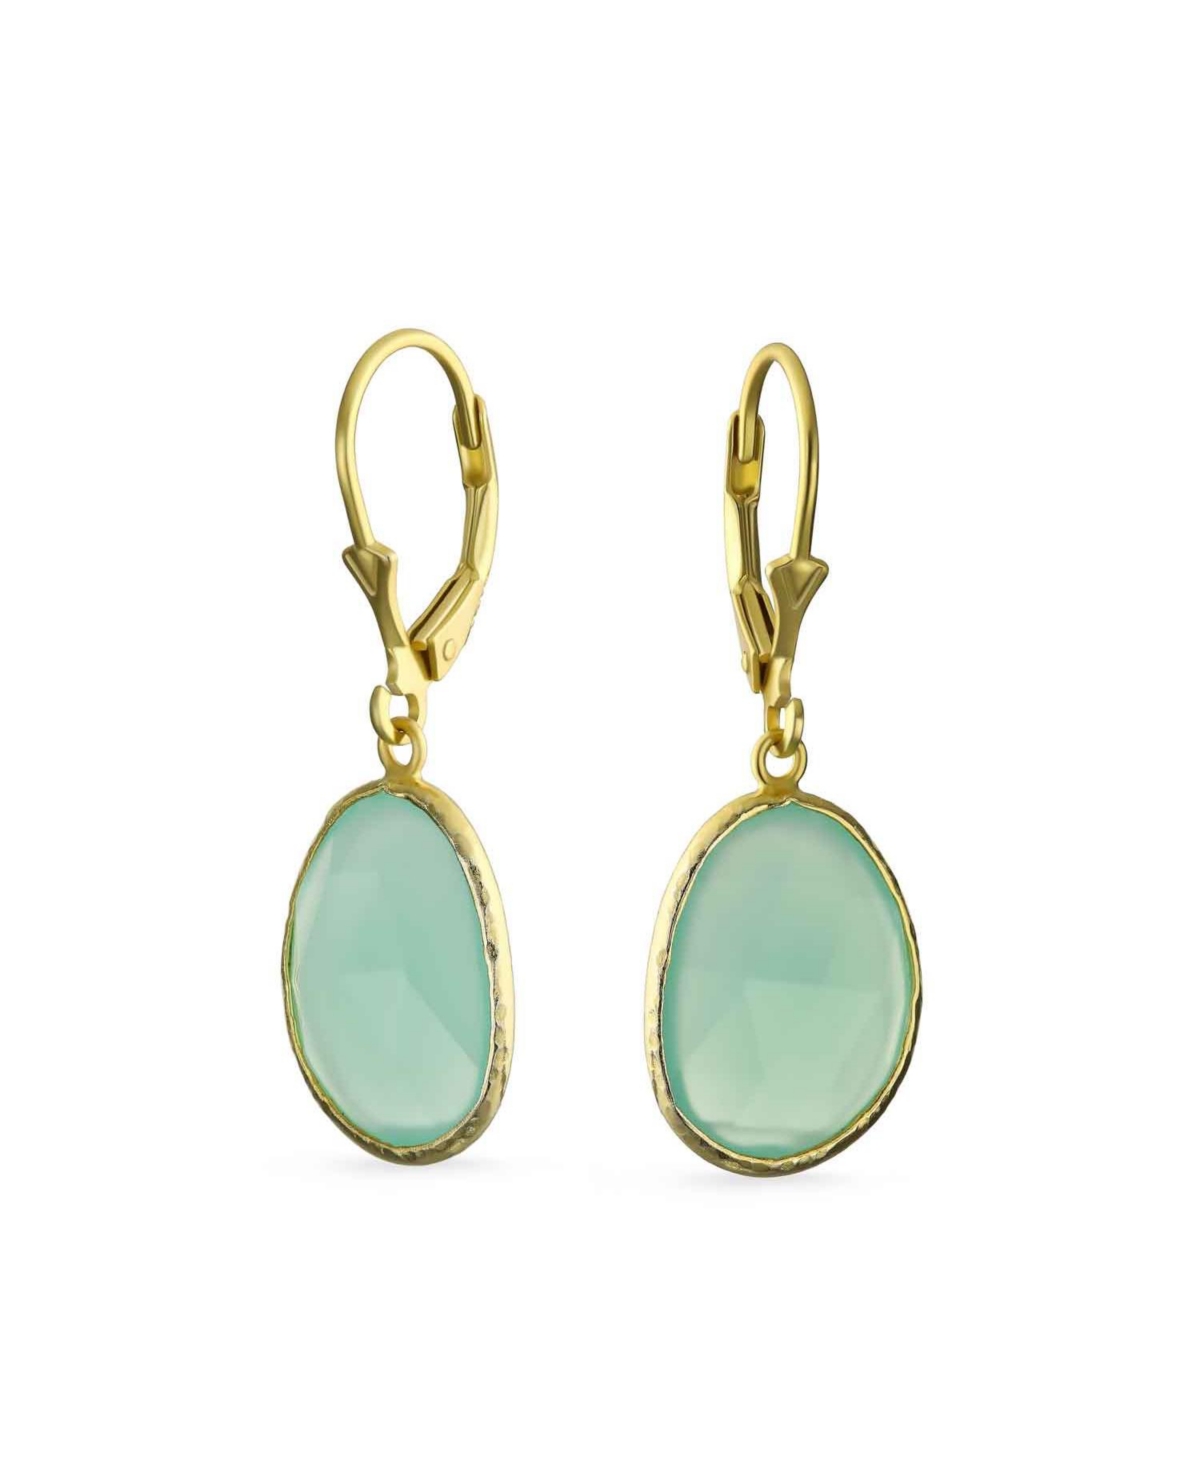 Elegant Oval Faceted Pastel Stone Dangle Bezel Set: Lever Back Earrings Mint Green Simulated Chalcedony 14K Gold-Plated.925 Sterling Silver - Blue